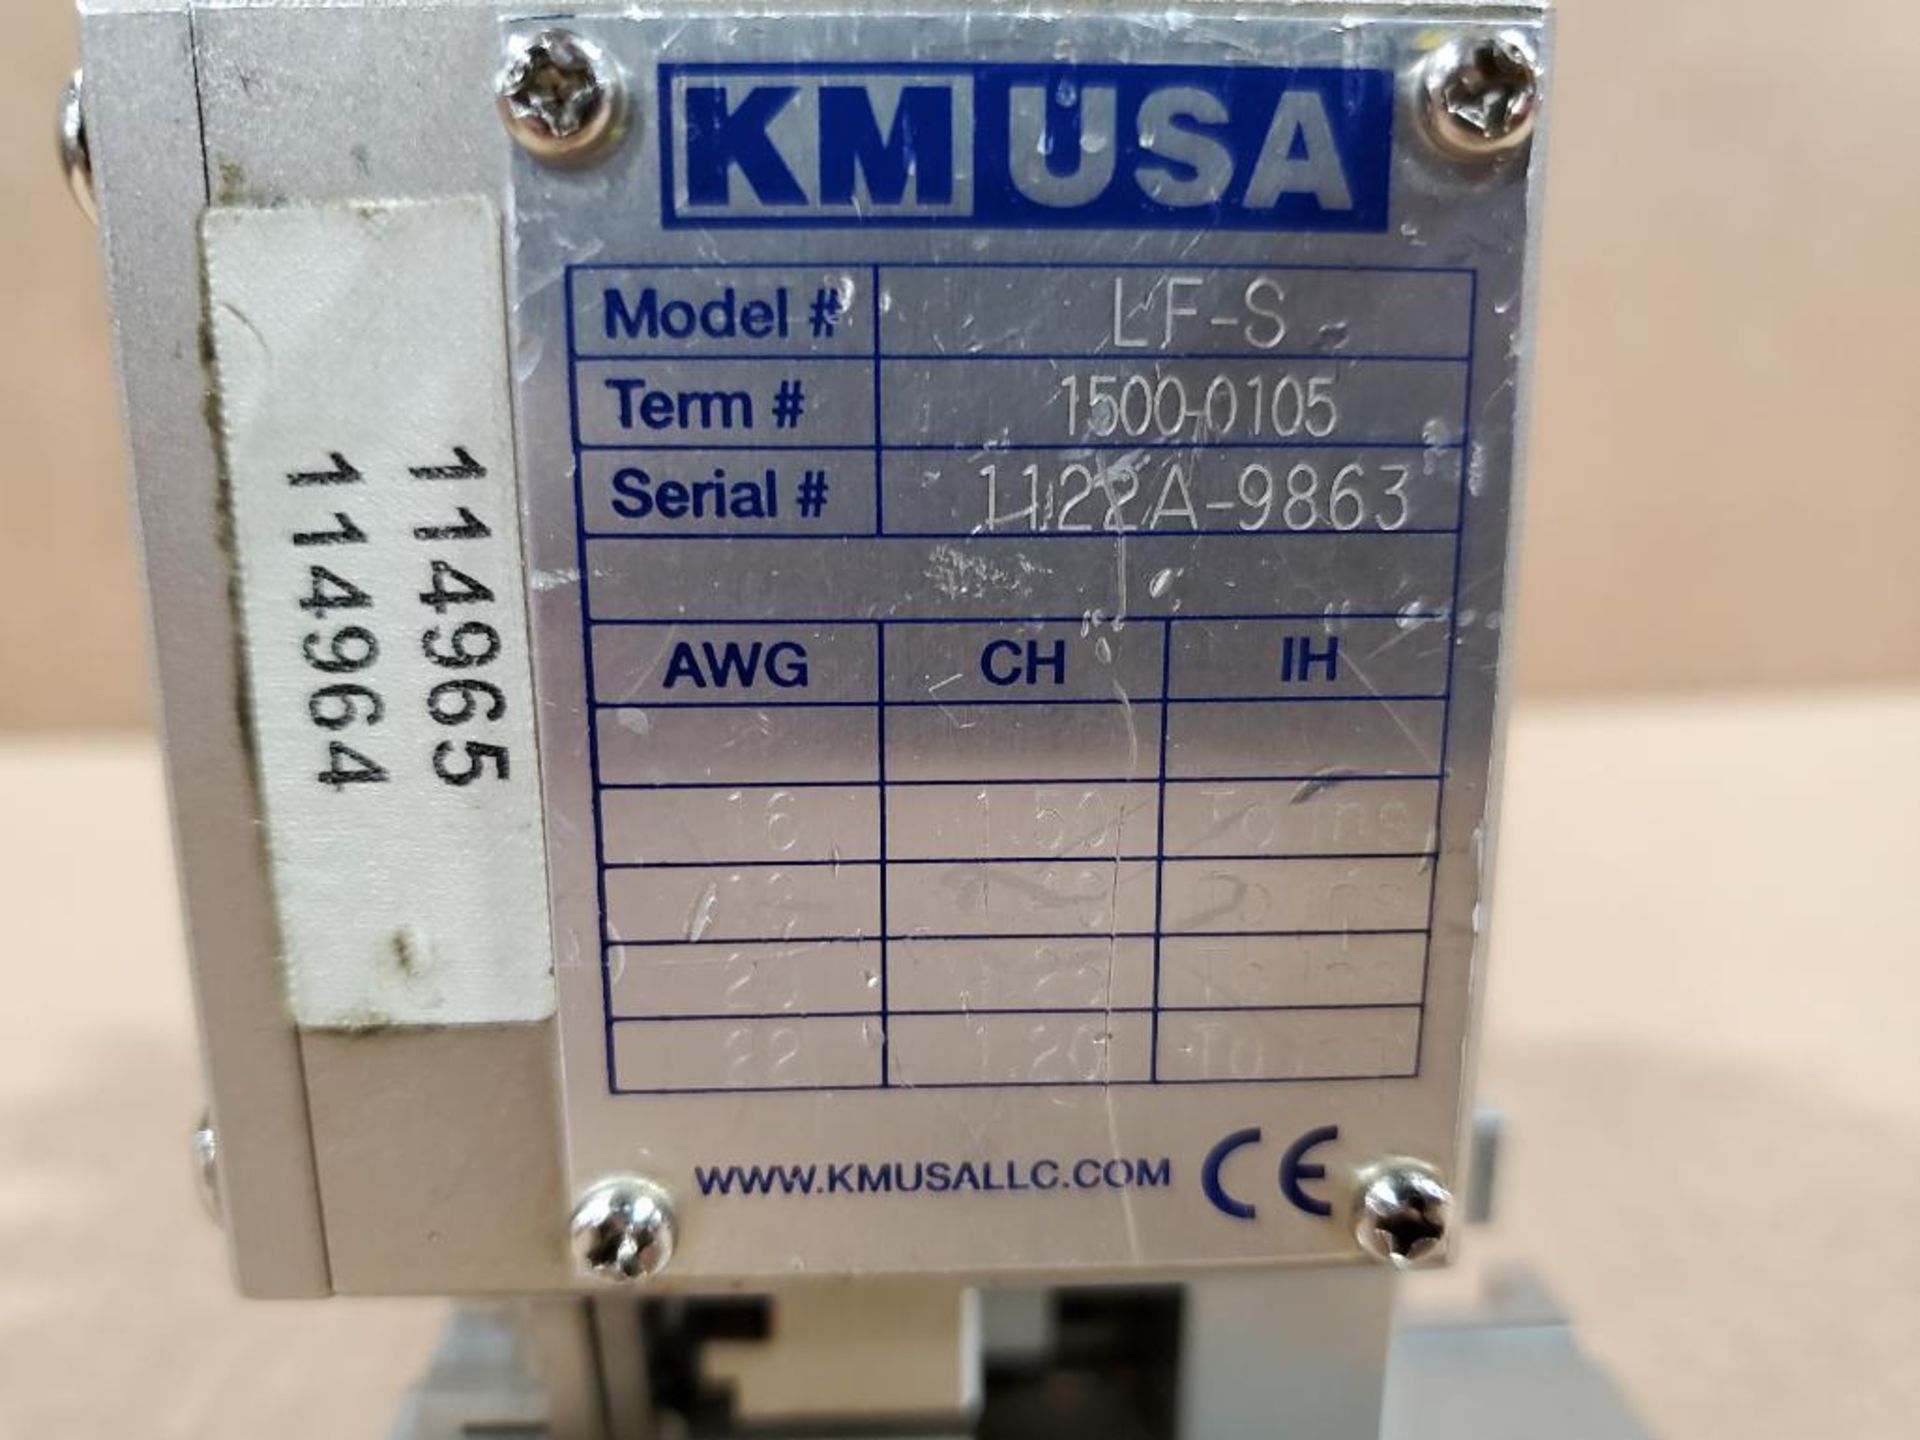 KM USA wire terminal applicator. Number LF-S. - Image 2 of 6